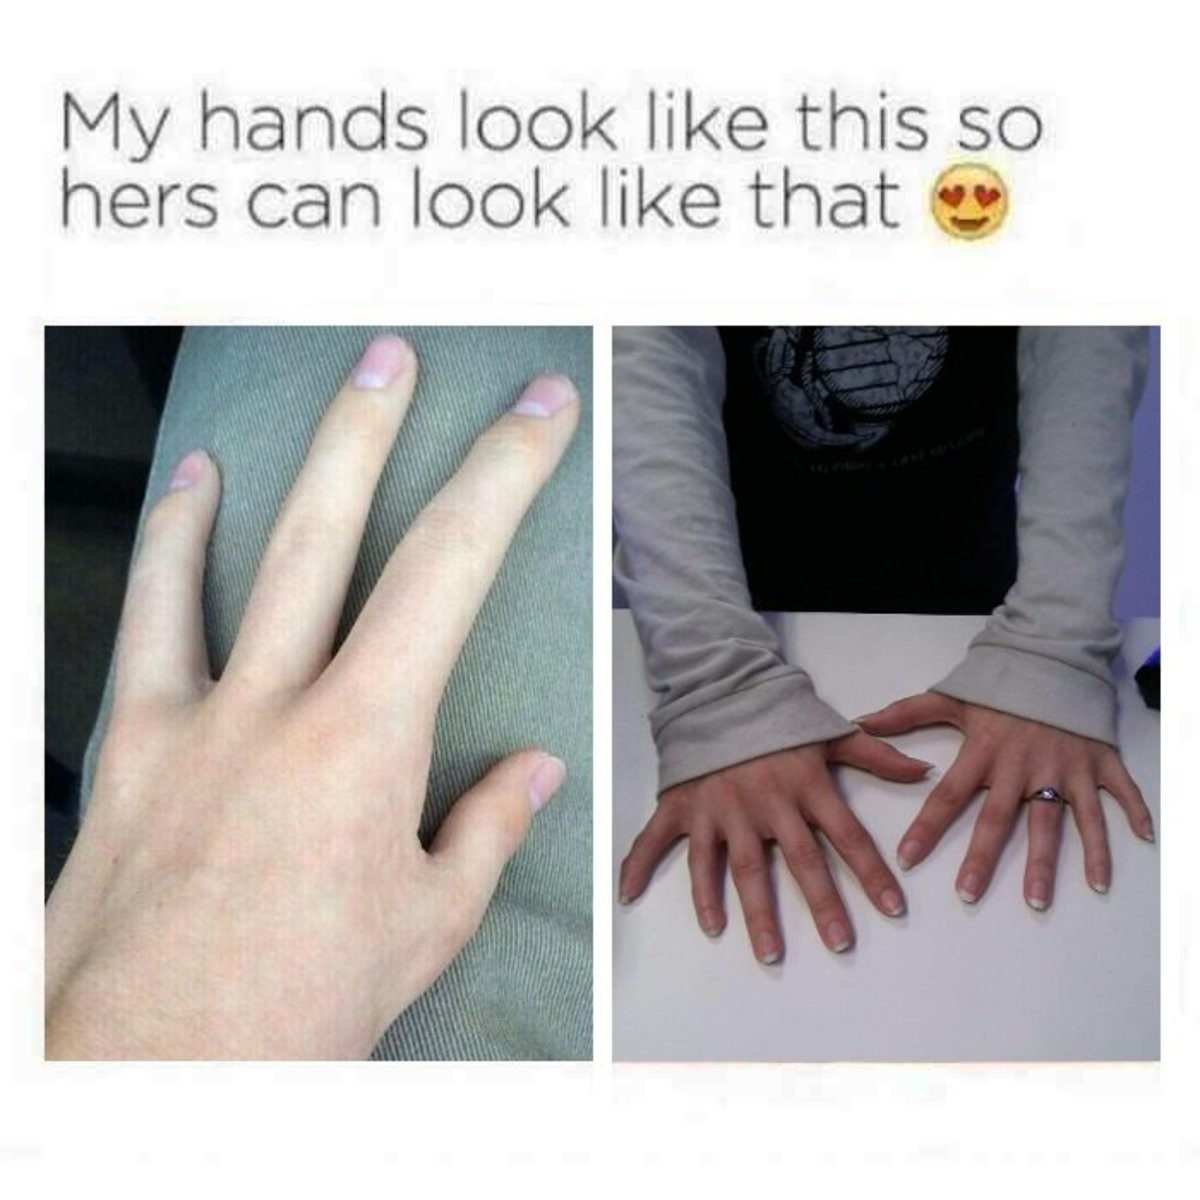 These are my hands. My hands look like this so her hands can look like that. My hands.